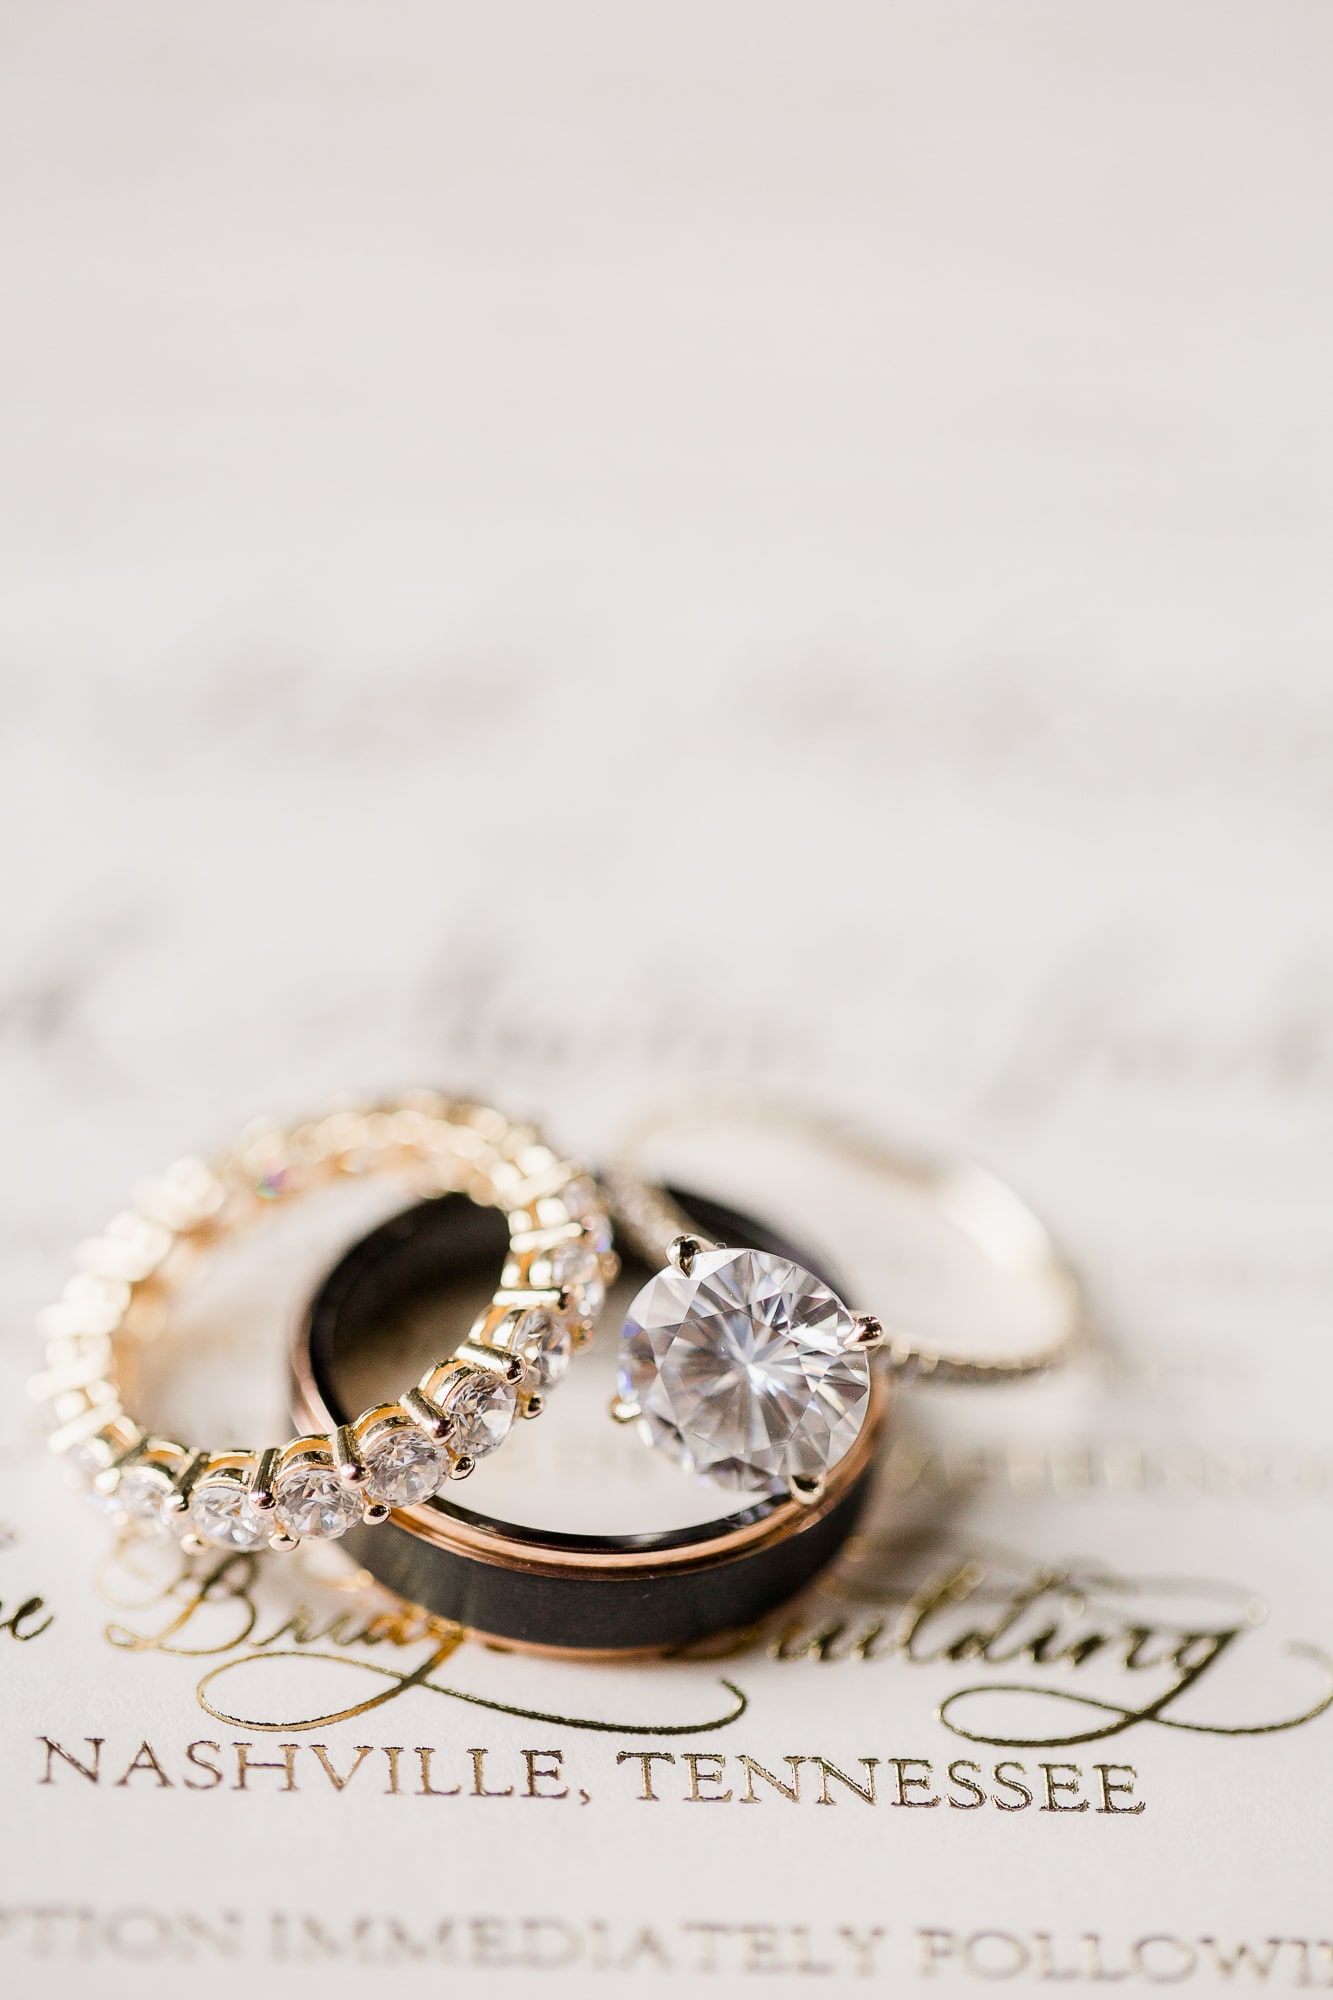 Wedding and Engagement Ring for Tennessee Wedding | Nashville Bride Guide